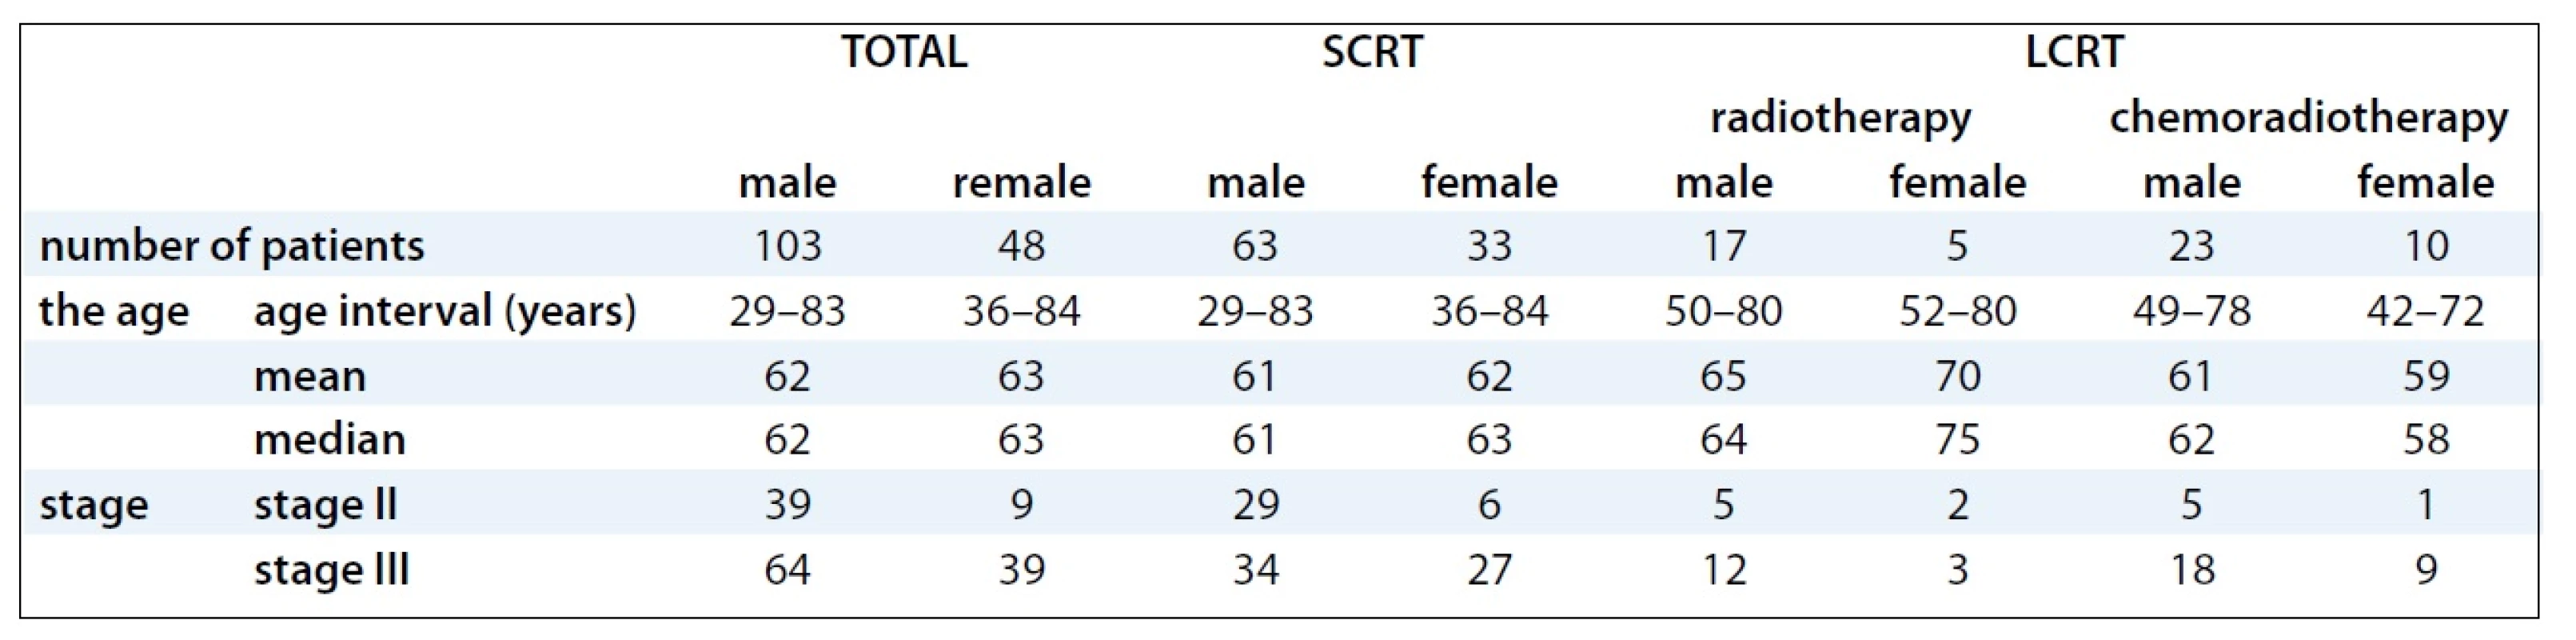 Socio-demographic and clinical characteristics of patients.